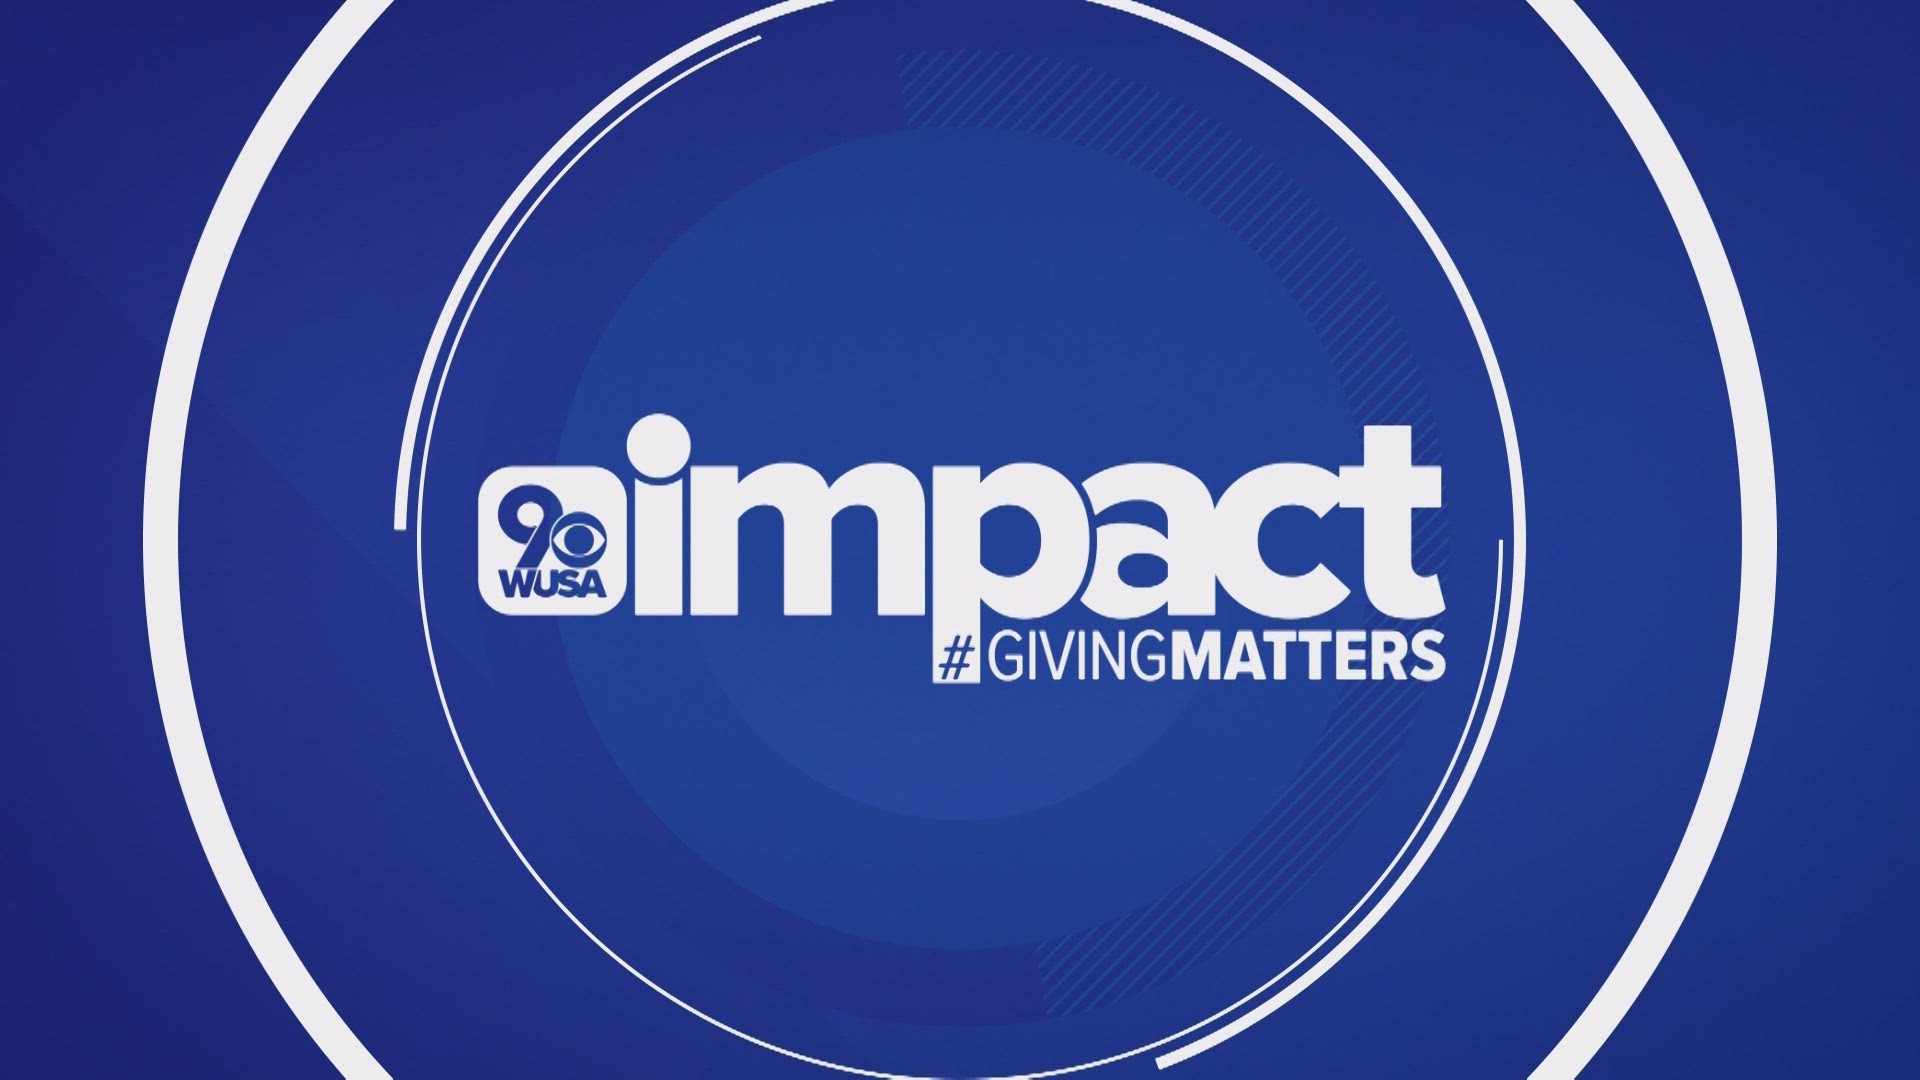 You helped the WUSA9 Impact team collect food for families all over the DMV. #GivingMatters